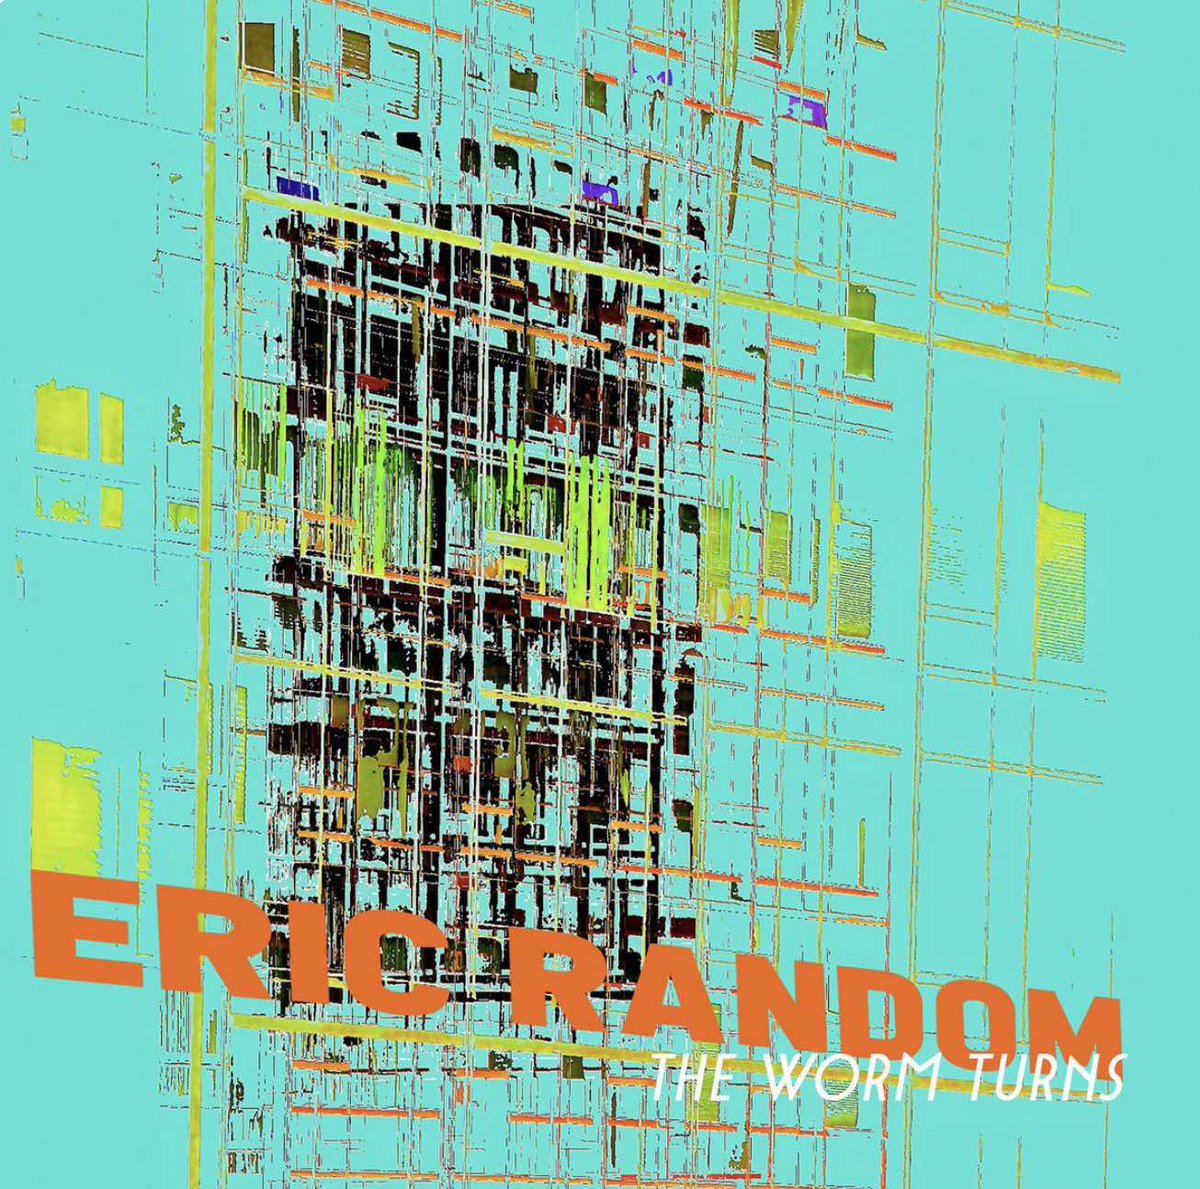 Next up... Continuing his excellent run of solo albums and further highlighting his significance in the world of post-punk electronica. From 'The Worm Turns' #NowPlaying 'No Way' - @theericrandom #ElectronicOdyssey Tune in : radiofreematlock.co.uk